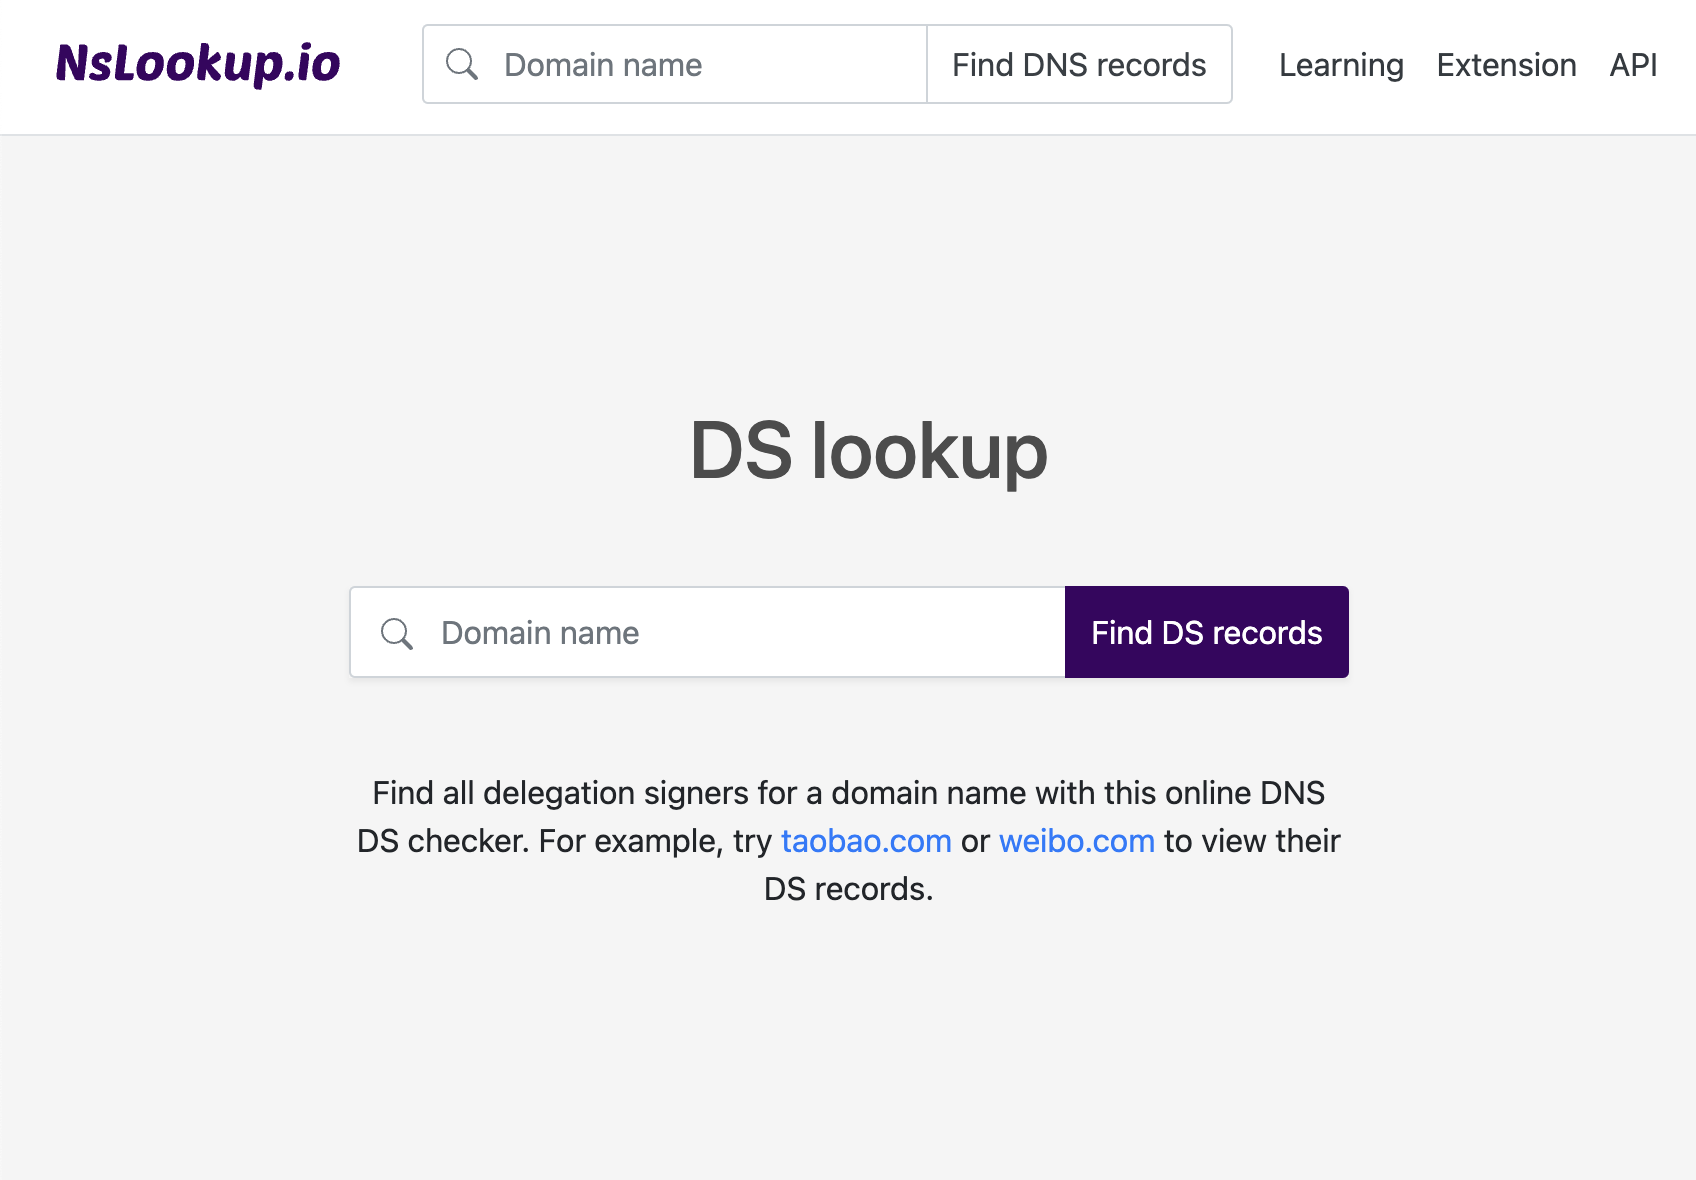 Open the DS lookup tool